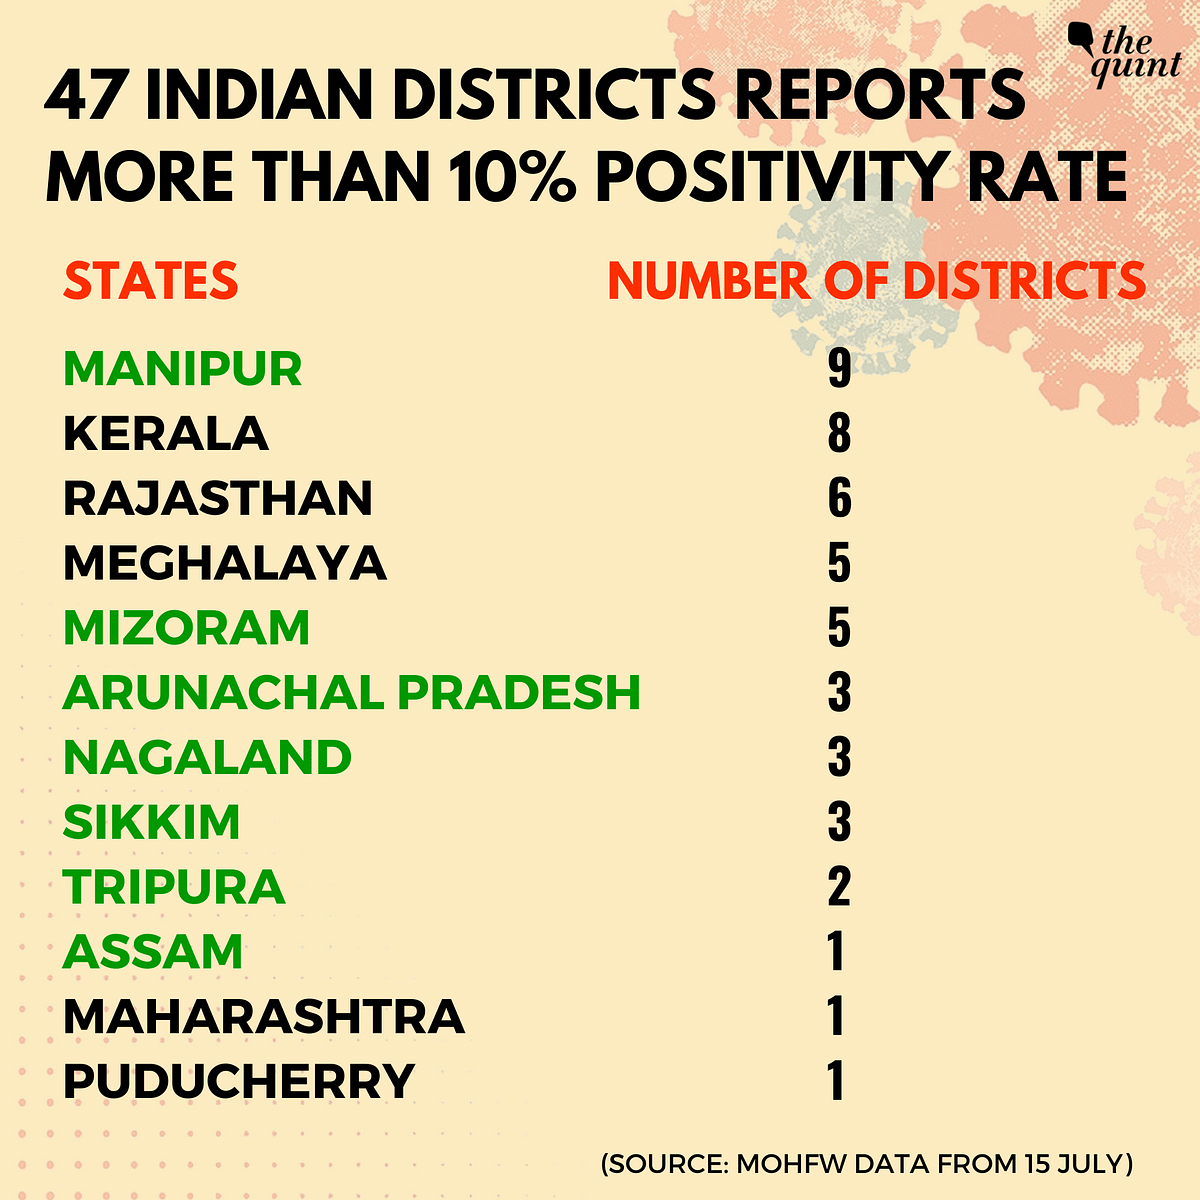 47 districts in India, a majority of which are from the northeastern states have a positivity rate above 10 percent.